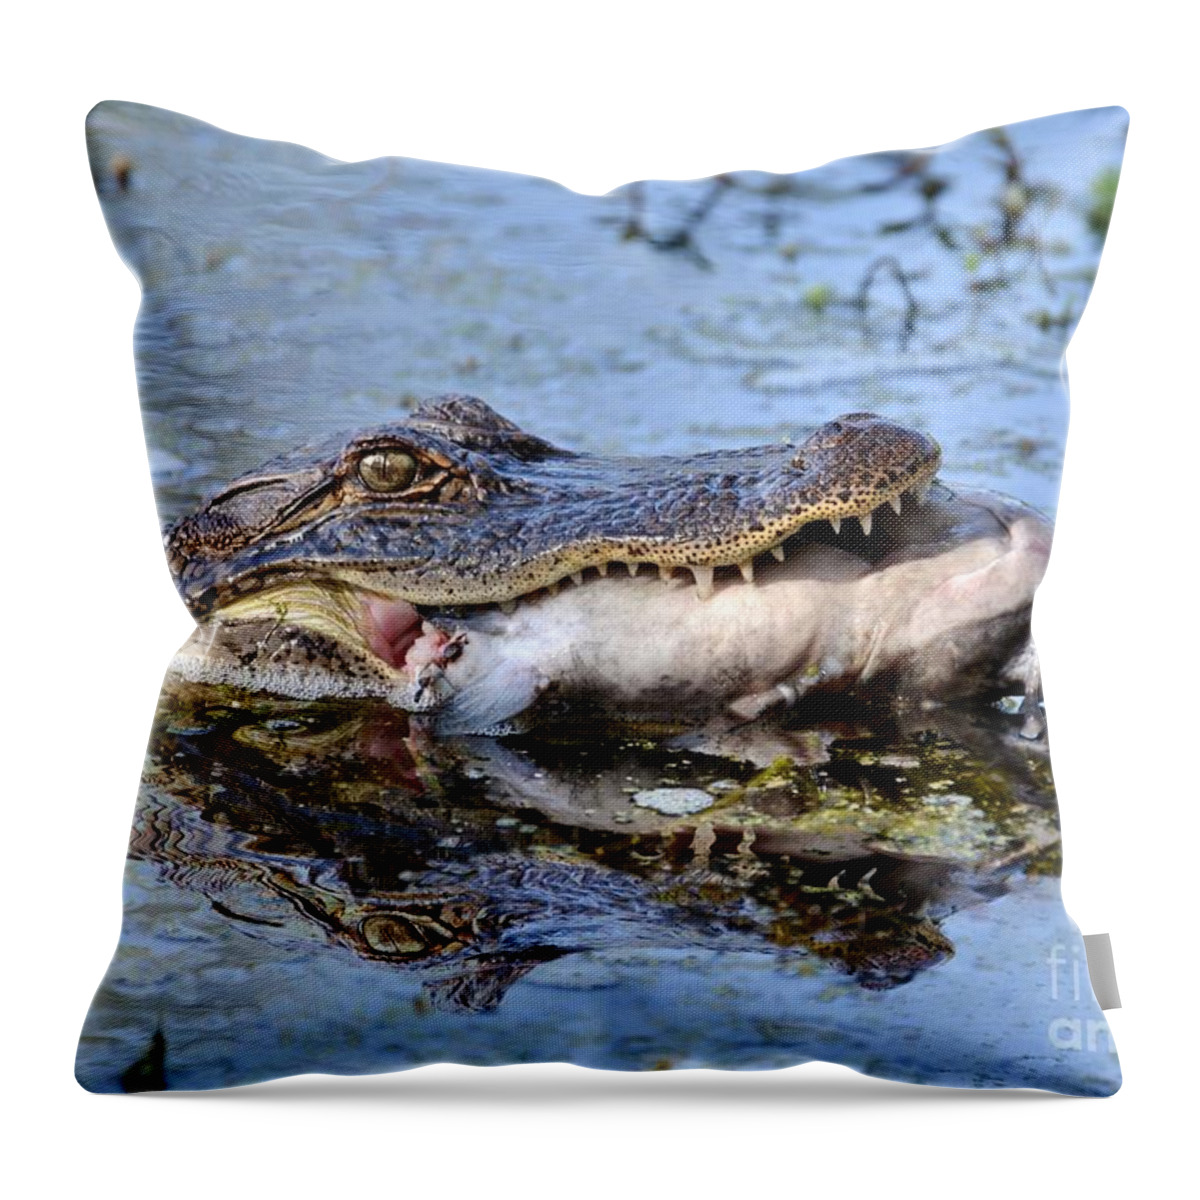 Alligator Throw Pillow featuring the photograph Alligator Catches Catfish by Kathy Baccari